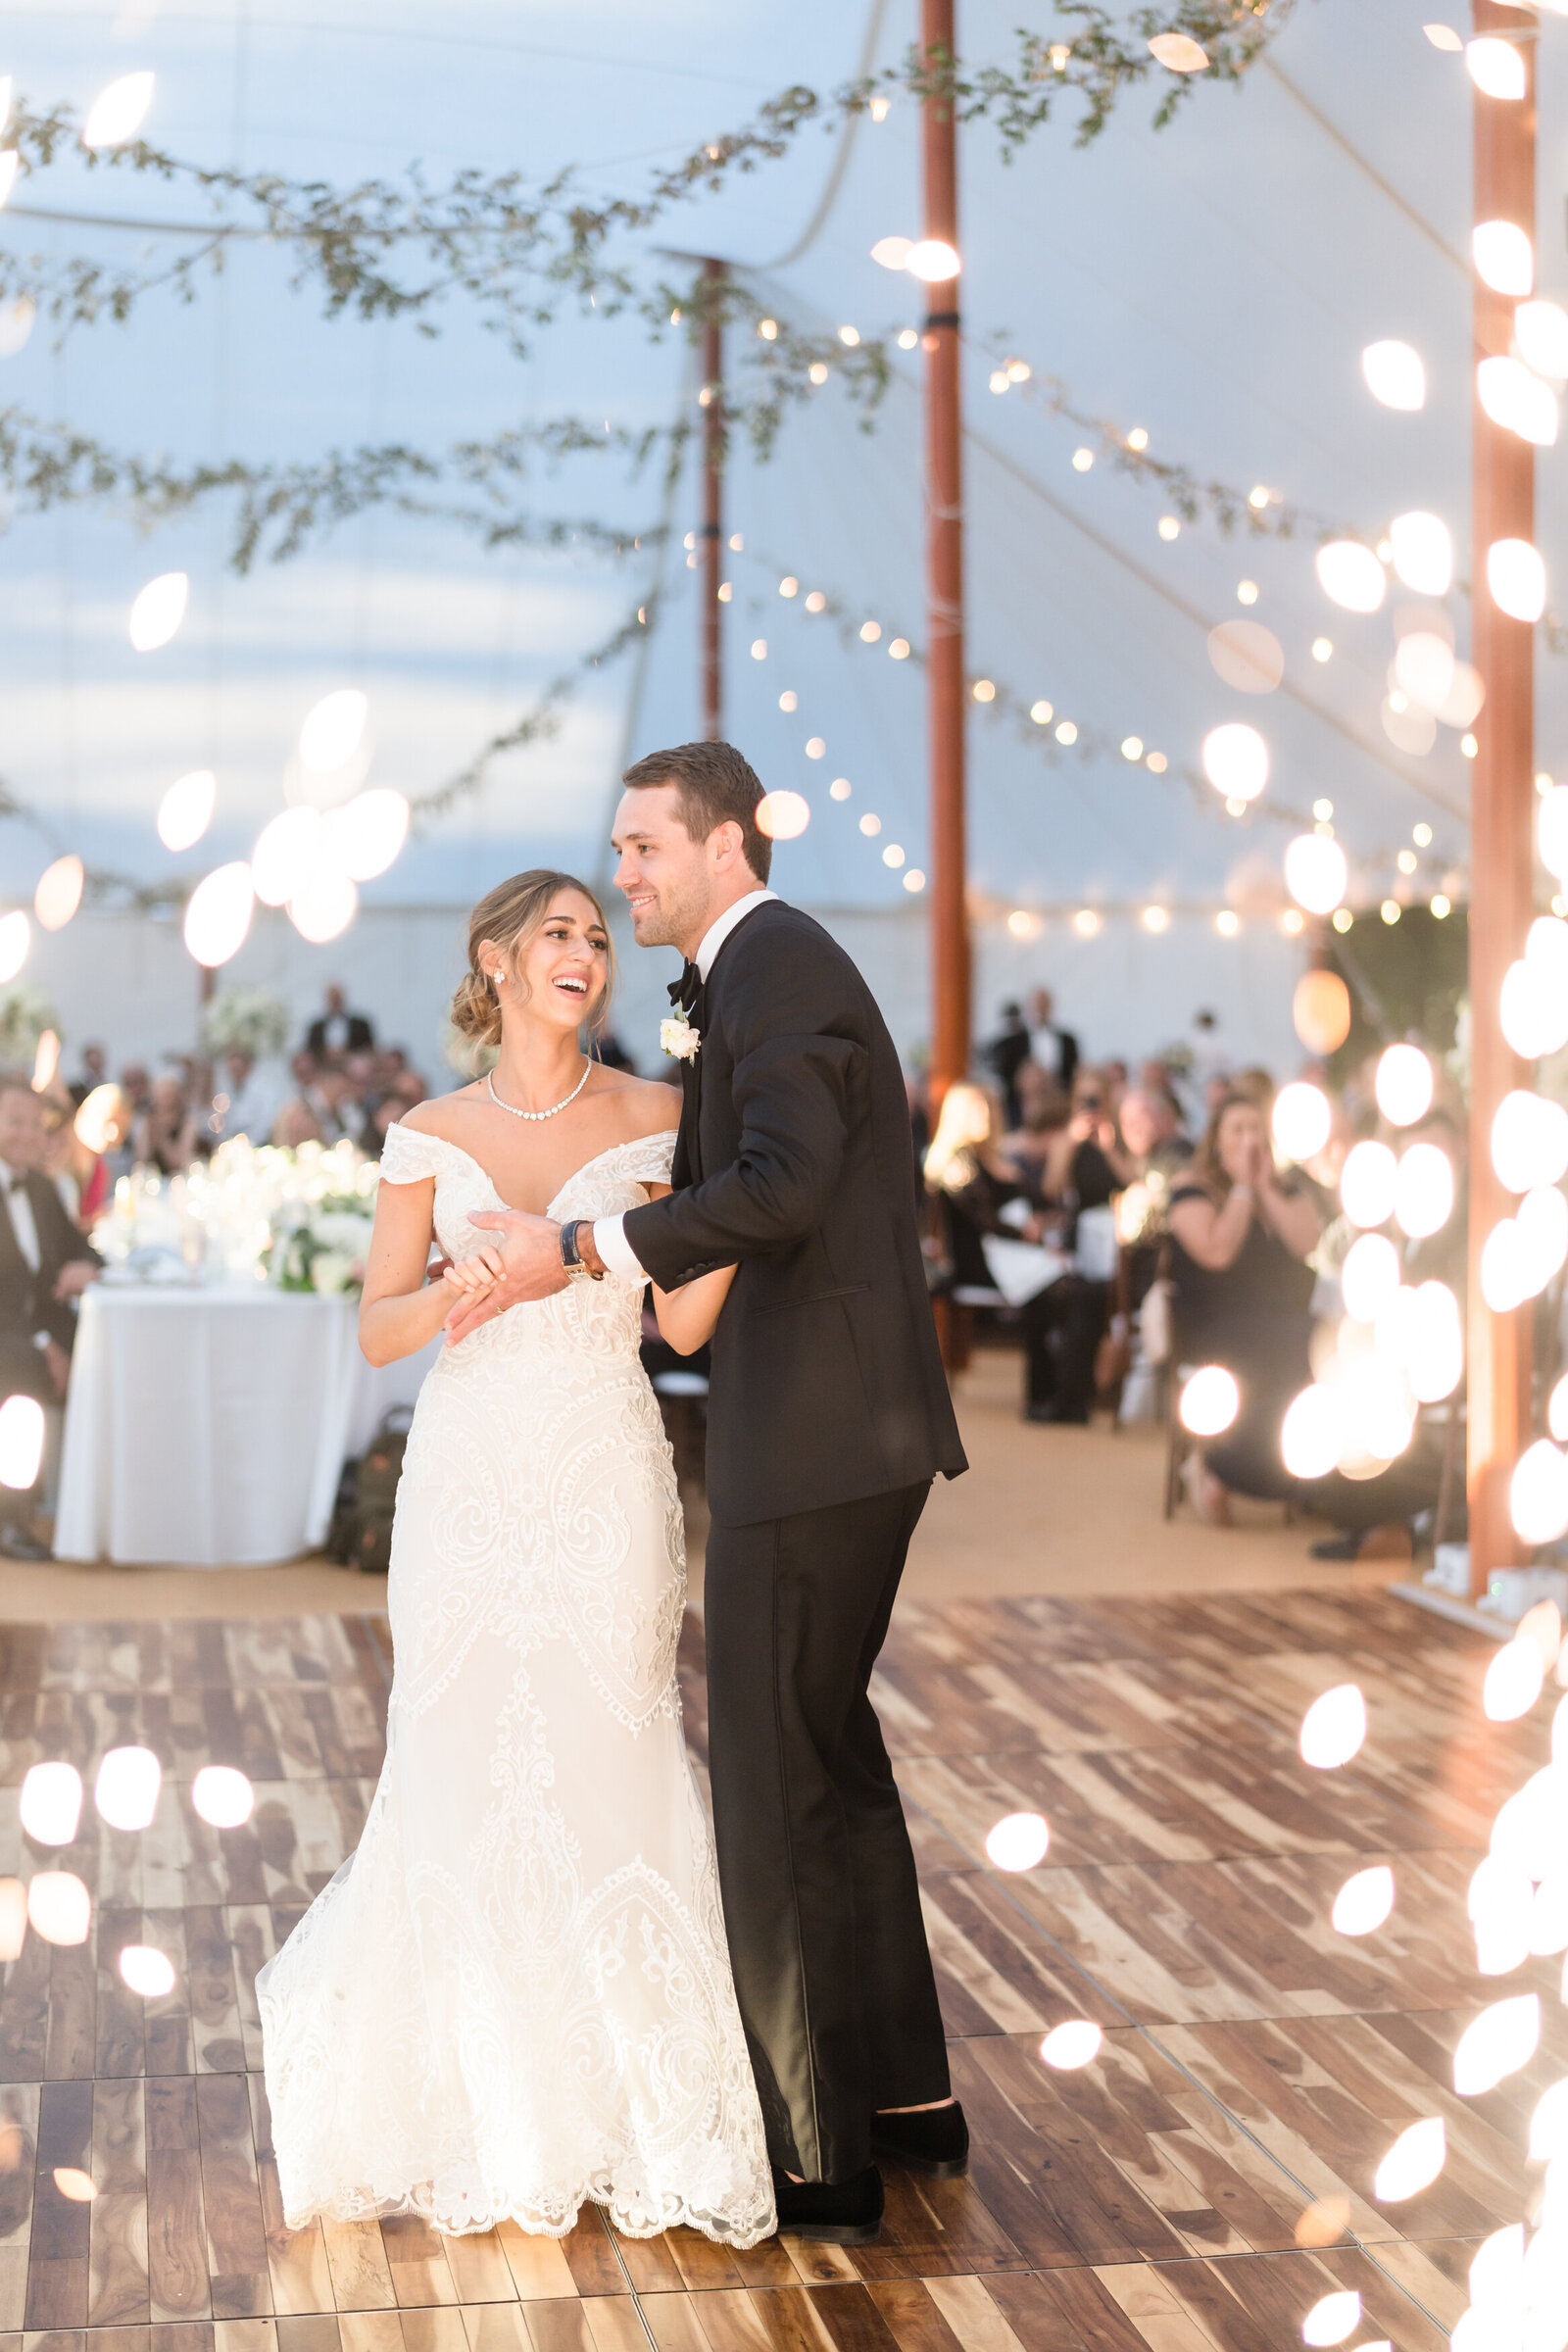 Bride and groom share their first dance as sparklers erupt all around them